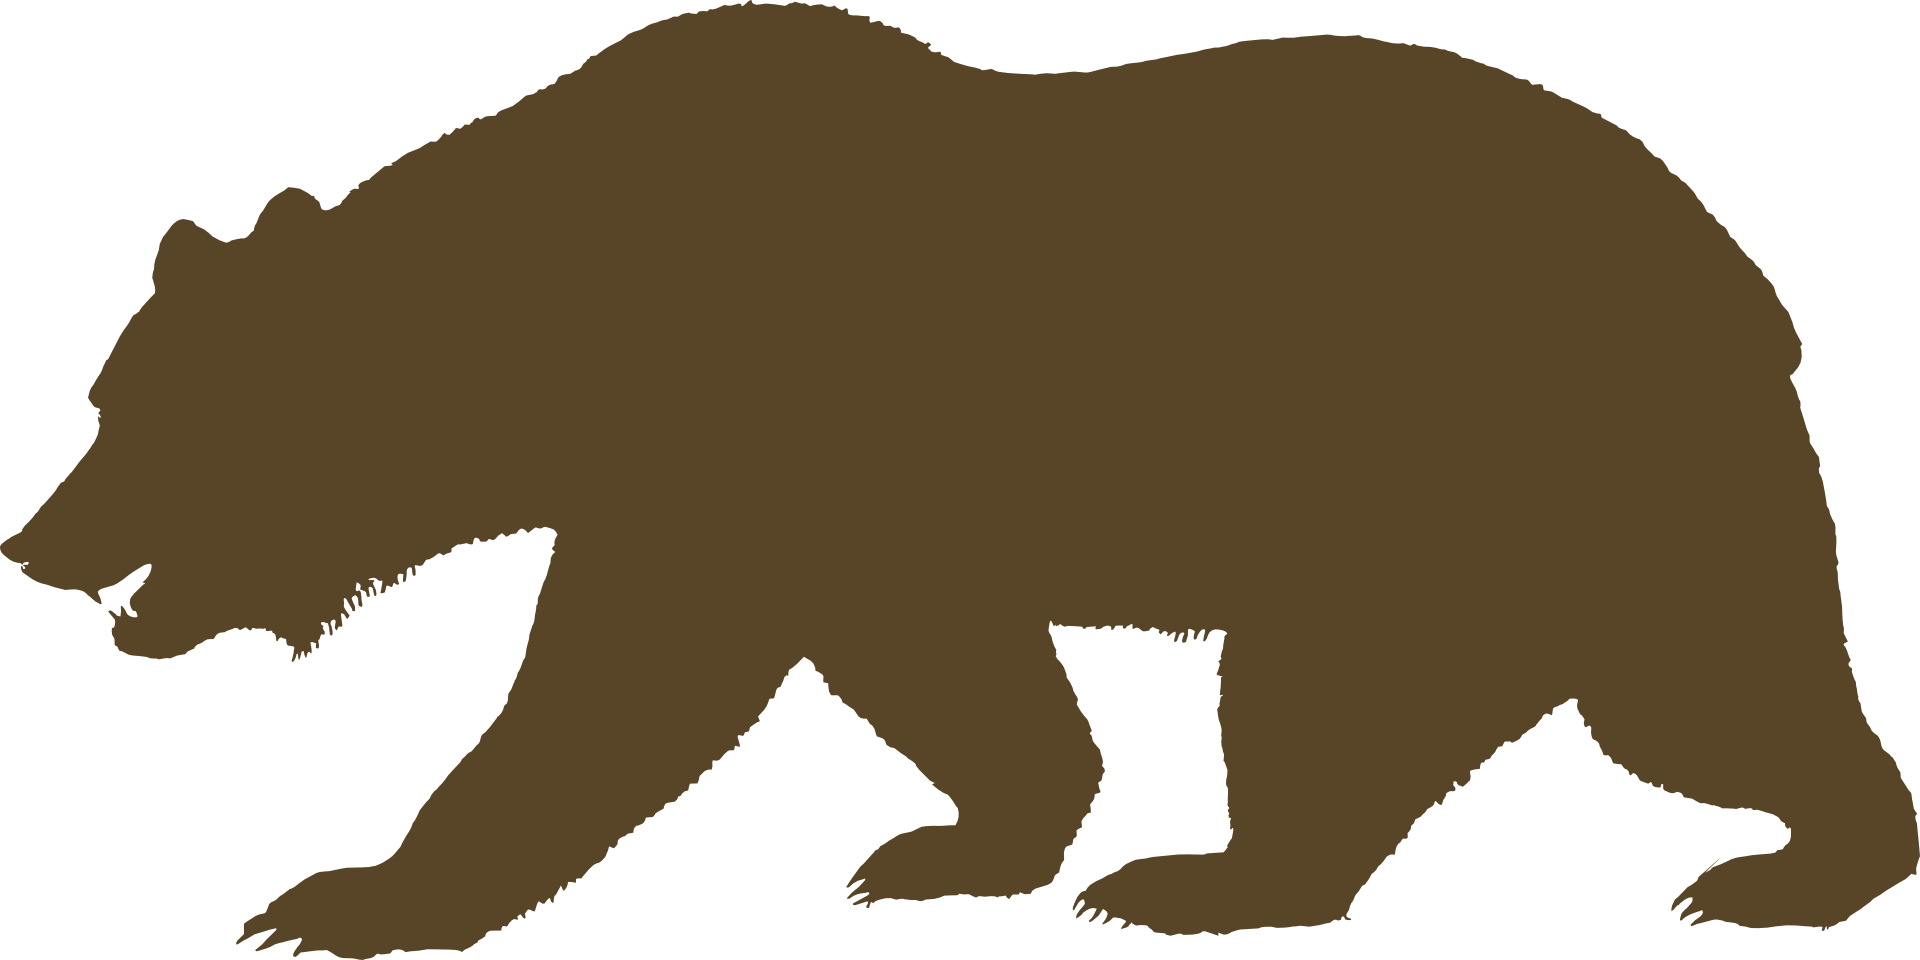 Bear silhouette drawing free image download